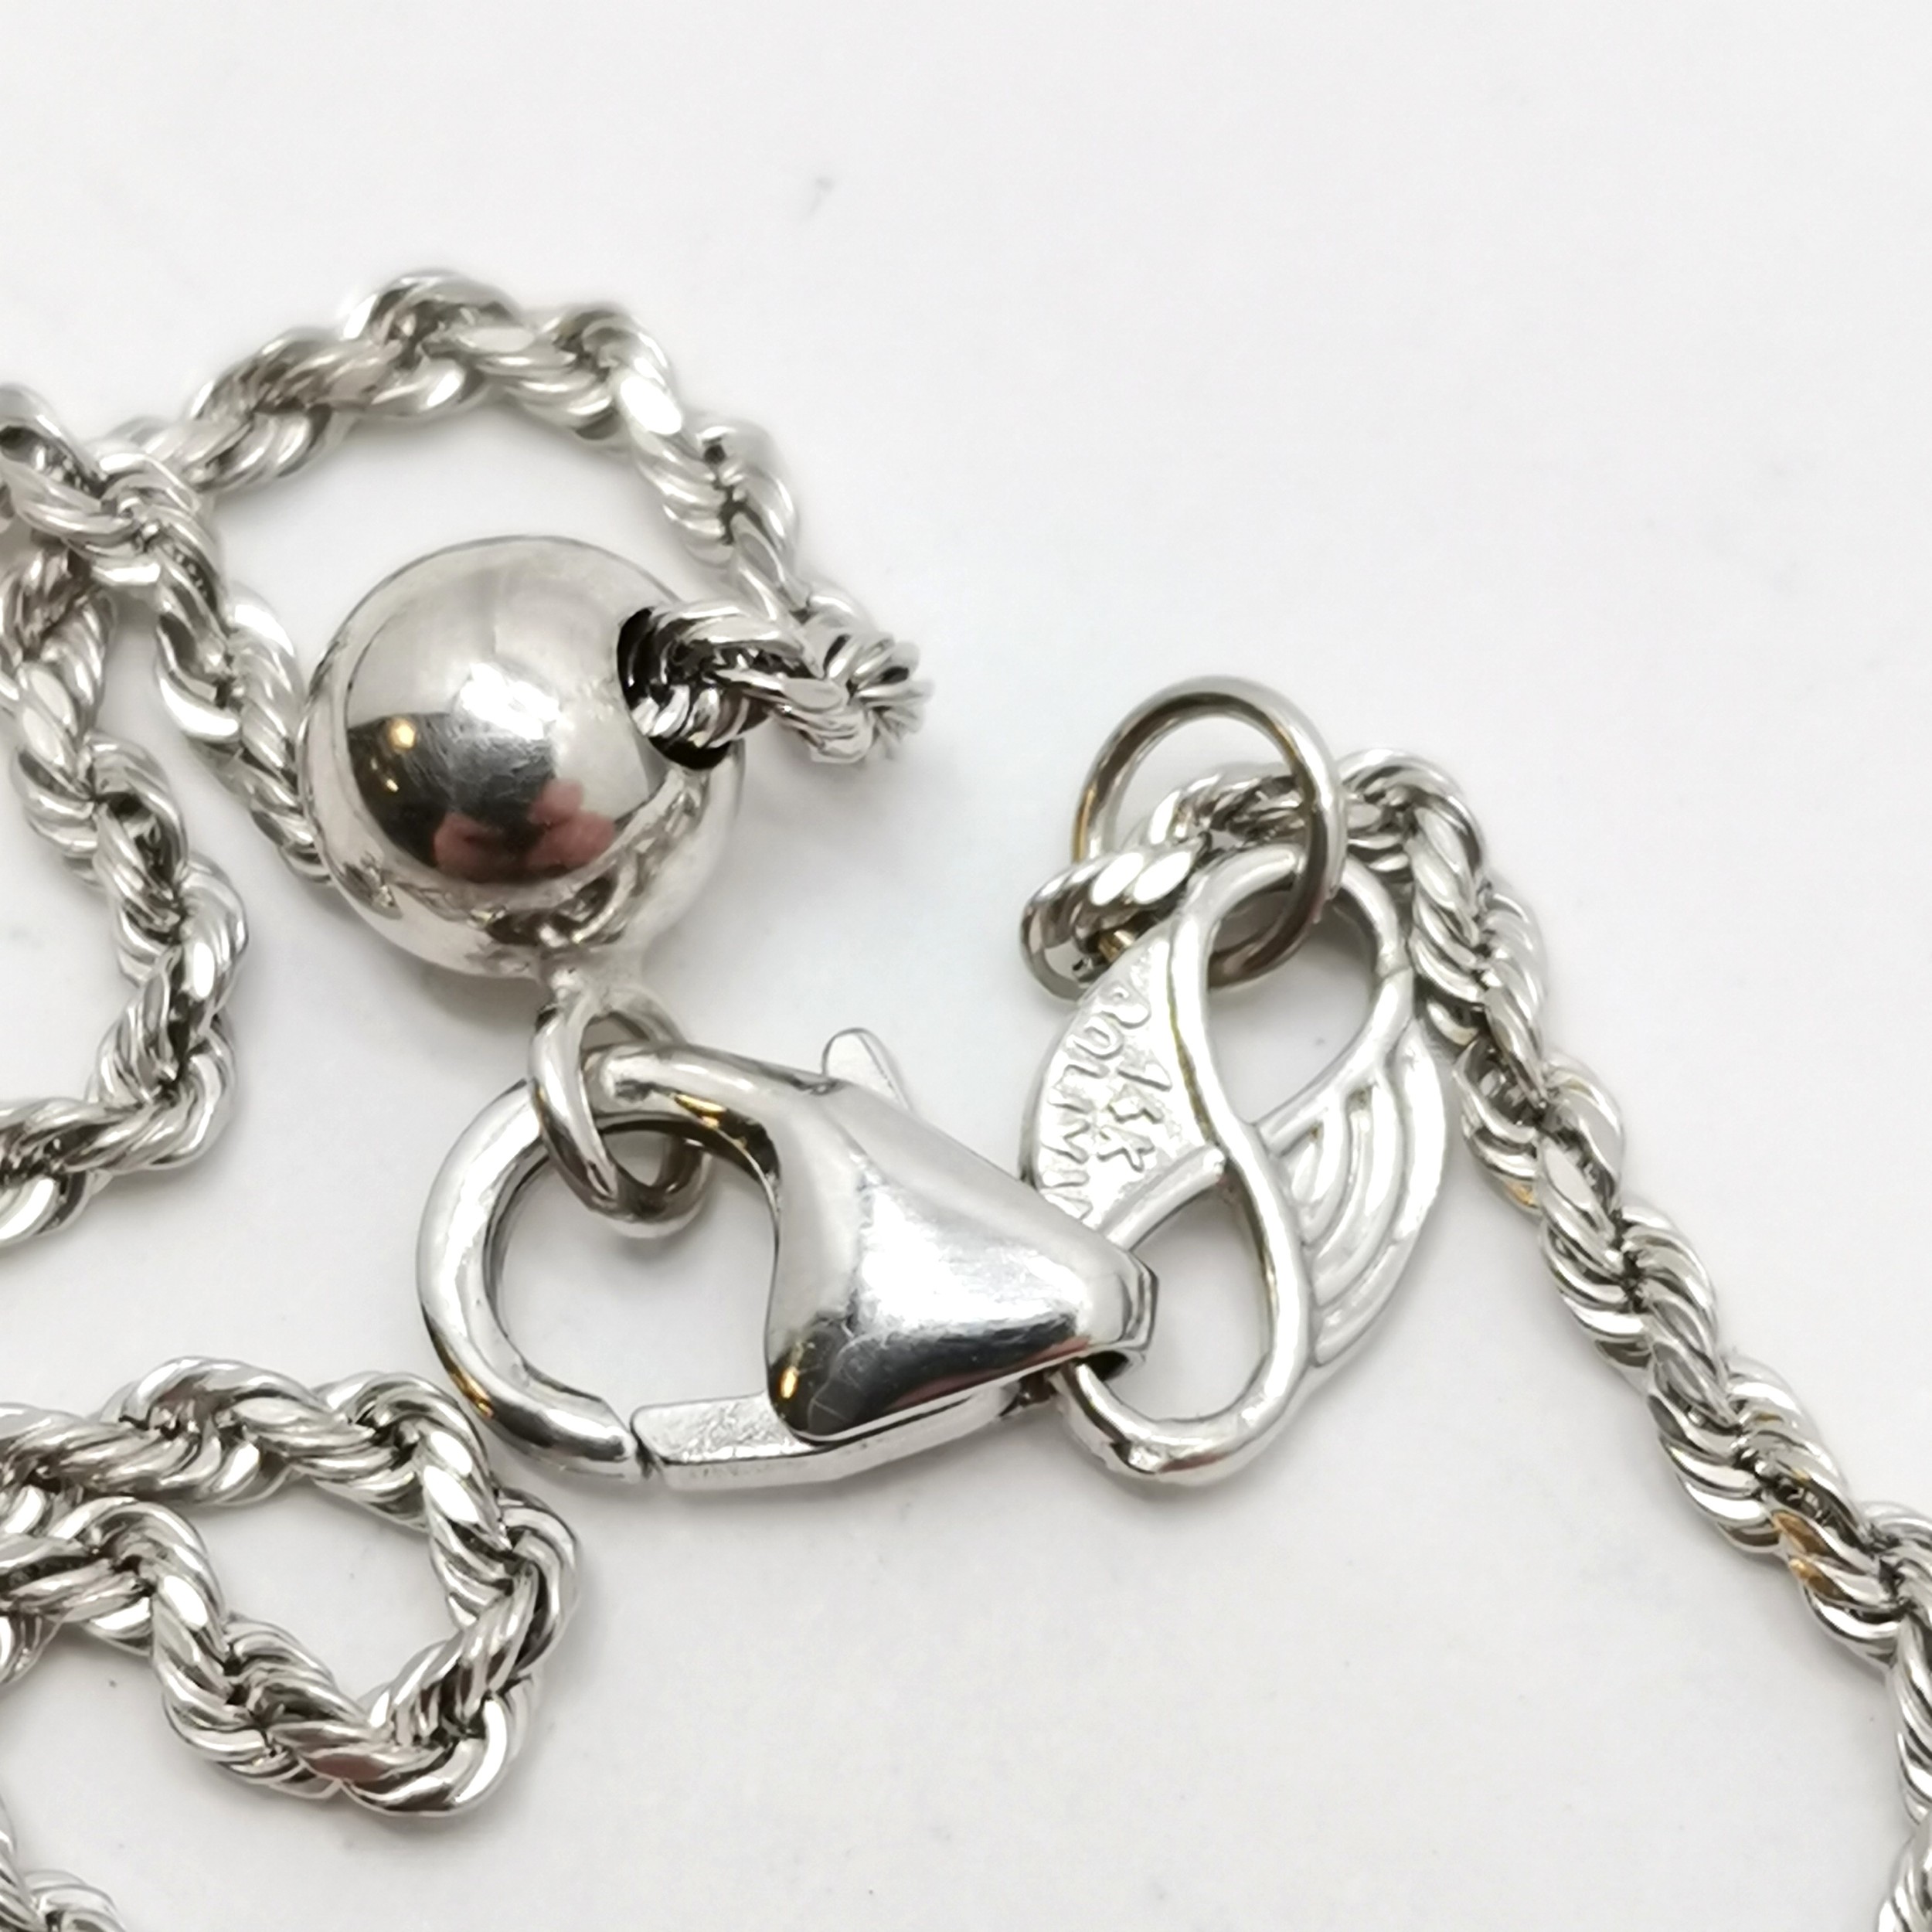 Bolivia 14ct white gold chain with heart pendant detail - 48cm + 11cm drop & 3.2g - Image 4 of 4